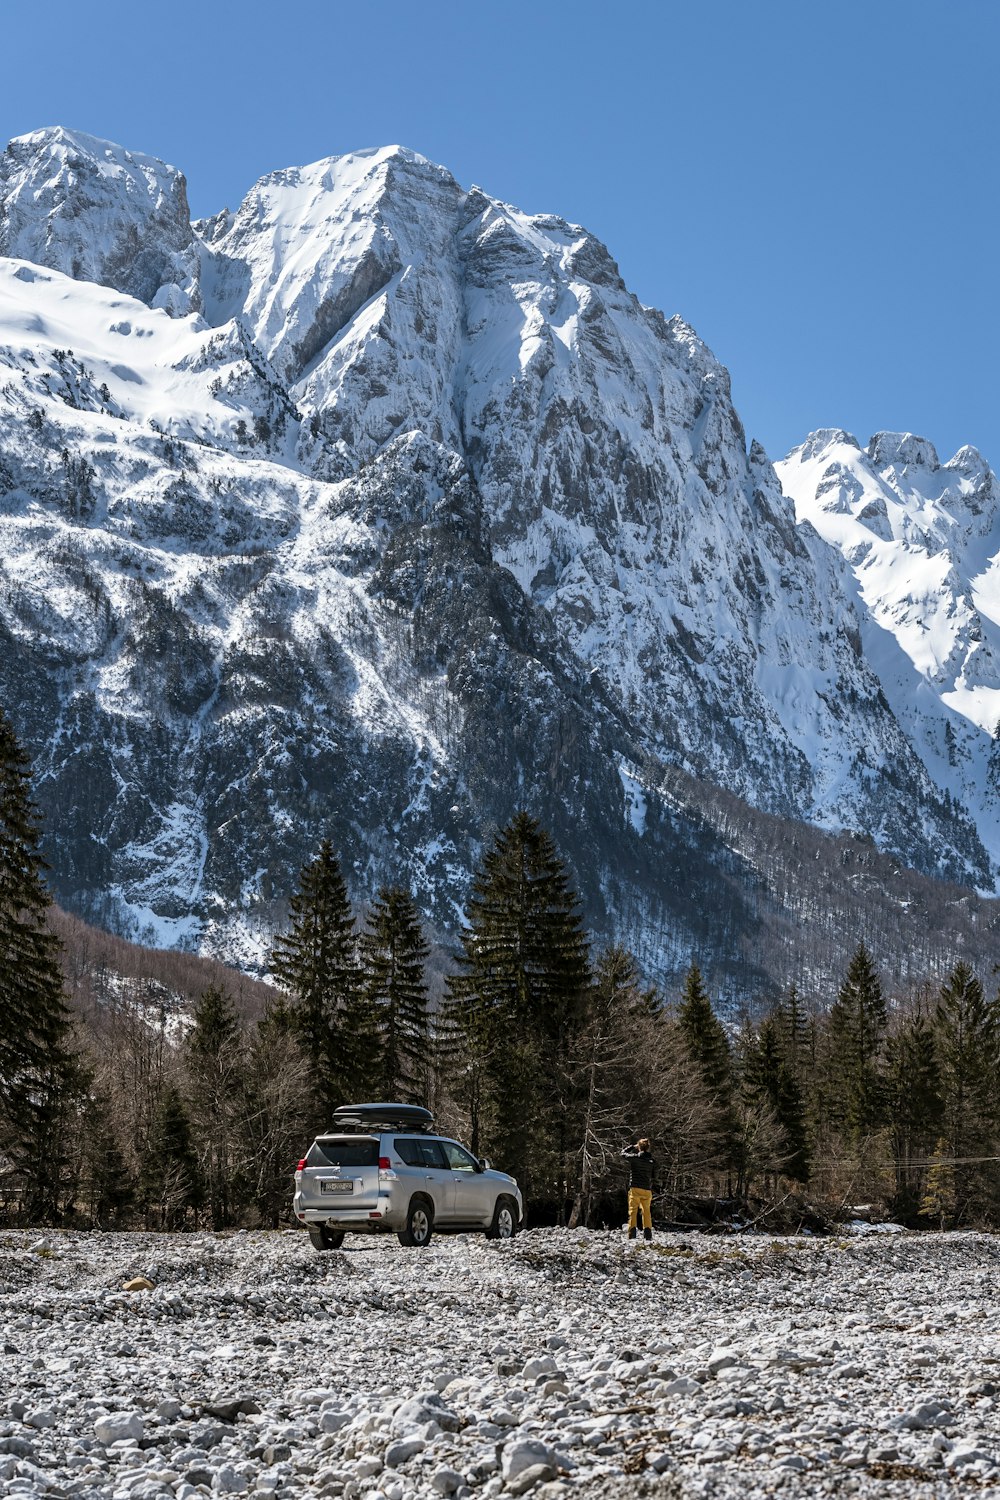 a car is parked in front of a snowy mountain